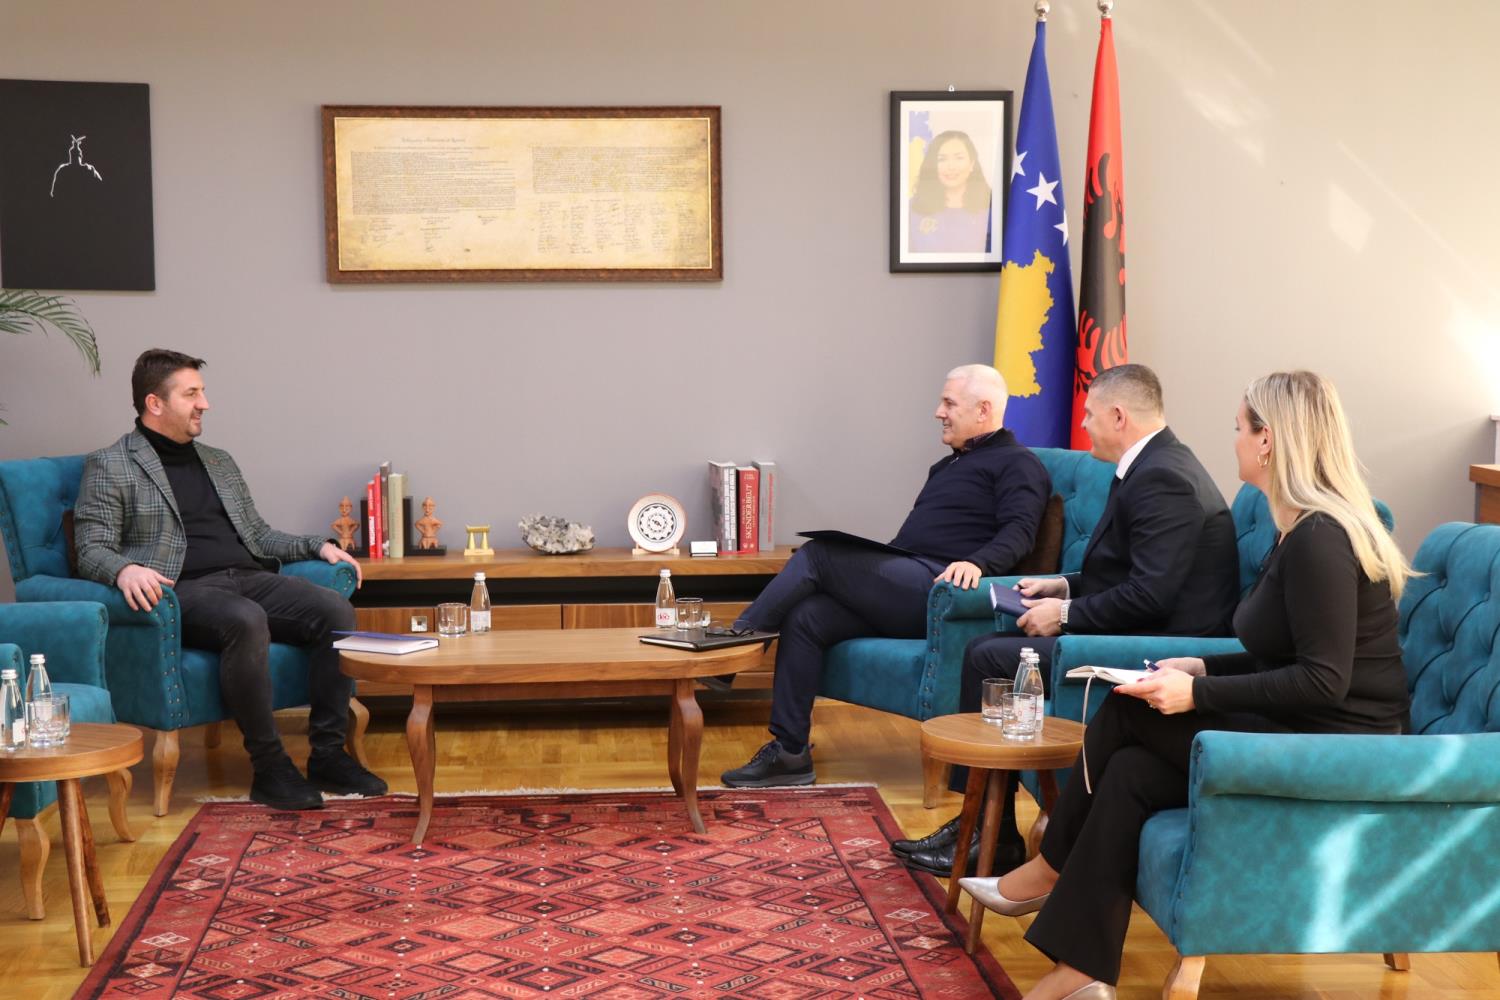 Minister of Internal Affairs Xhelal Sveçla hosts the Executive Director of the Institute for Crimes Committed During the War in Kosovo, Atdhe Hetemi